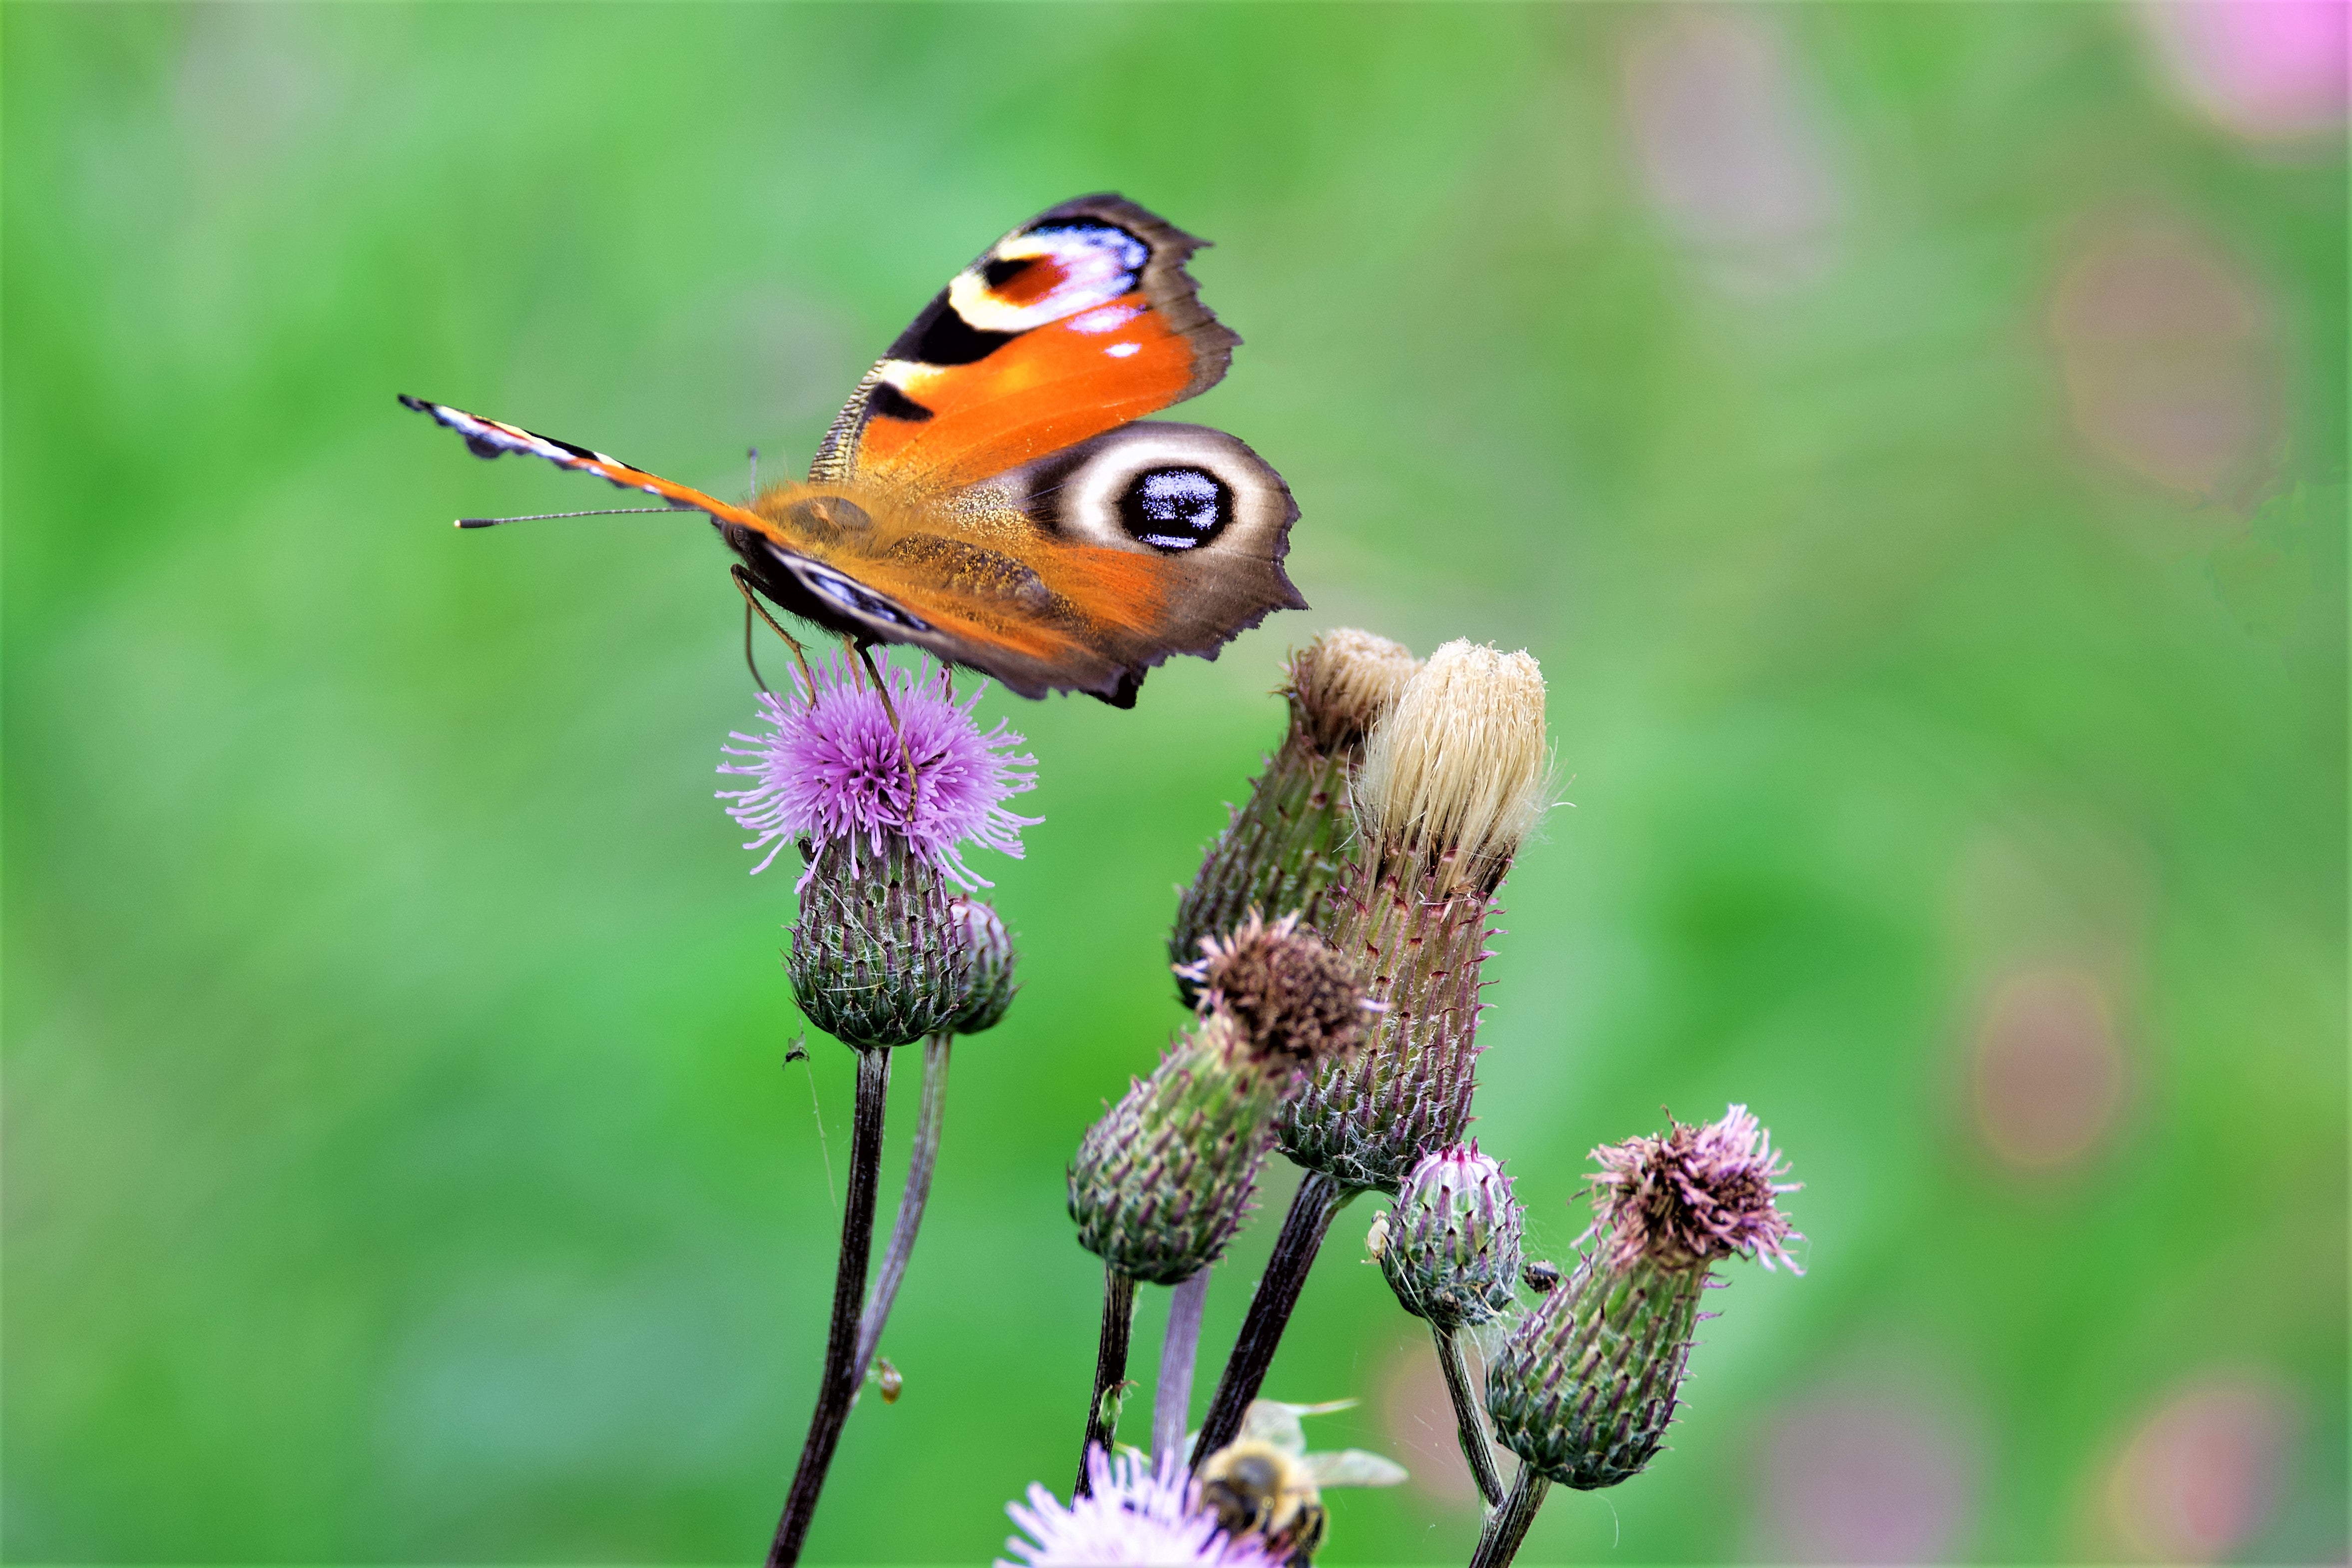 Butterflies have experienced declines in numbers of between 30 and 50 per cent across Europe